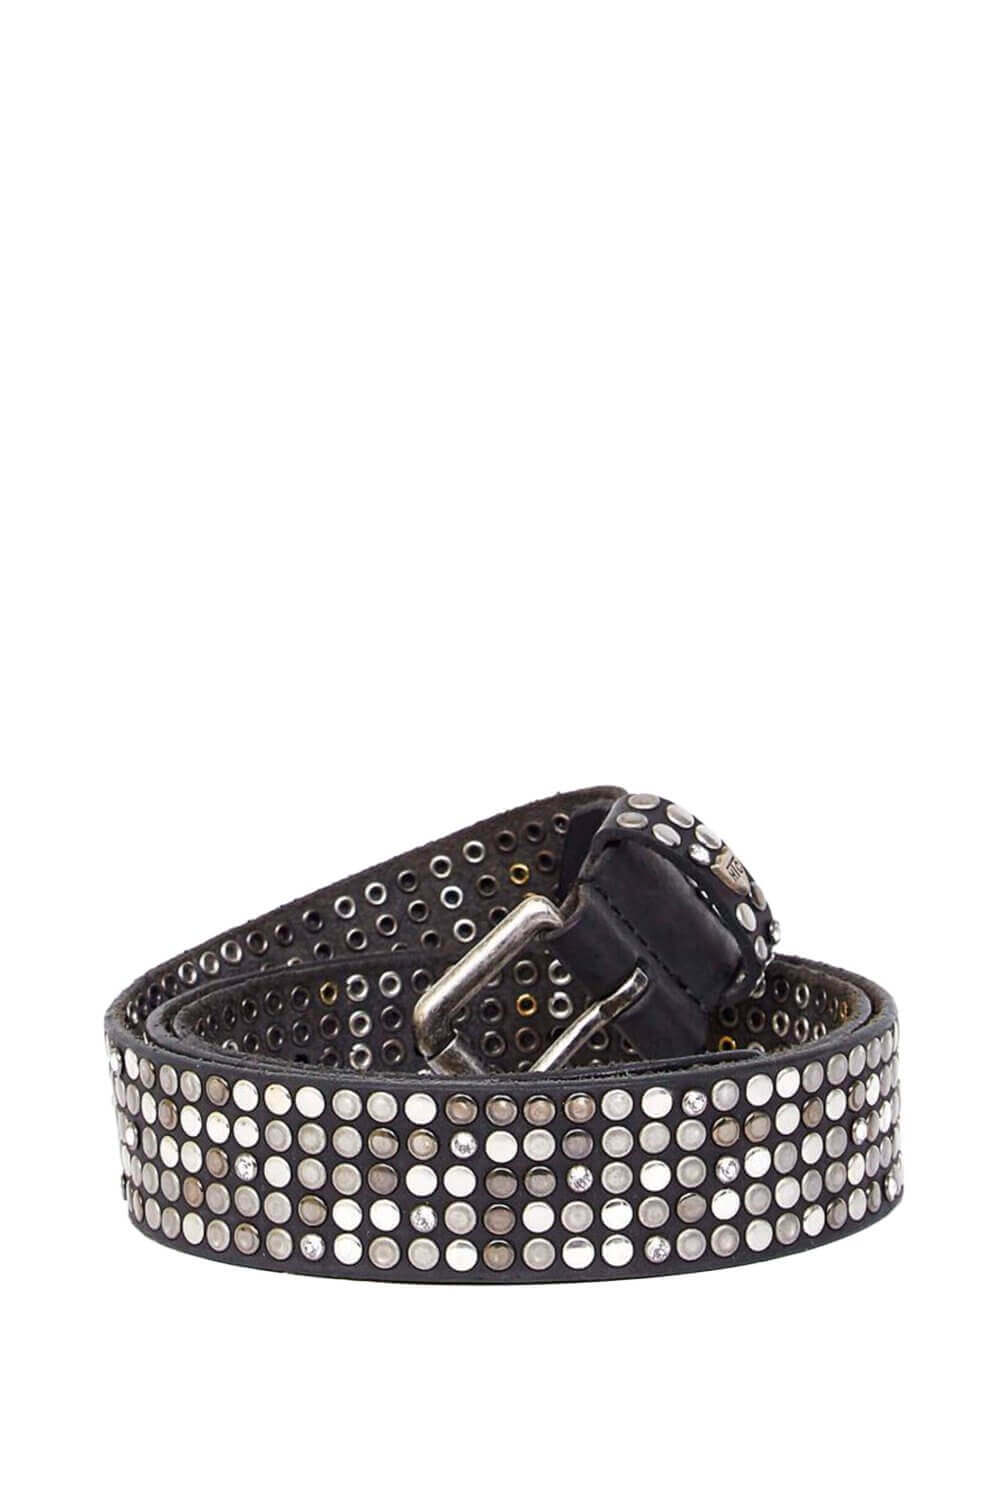 5.000 STUDS DELUXE BELT Black leather belt with mixed studs and rhinestones, brass buckle, studded zamac belt loop with HTC logo rivet. Height: 3.5 cm. Made in Italy. HTC LOS ANGELES